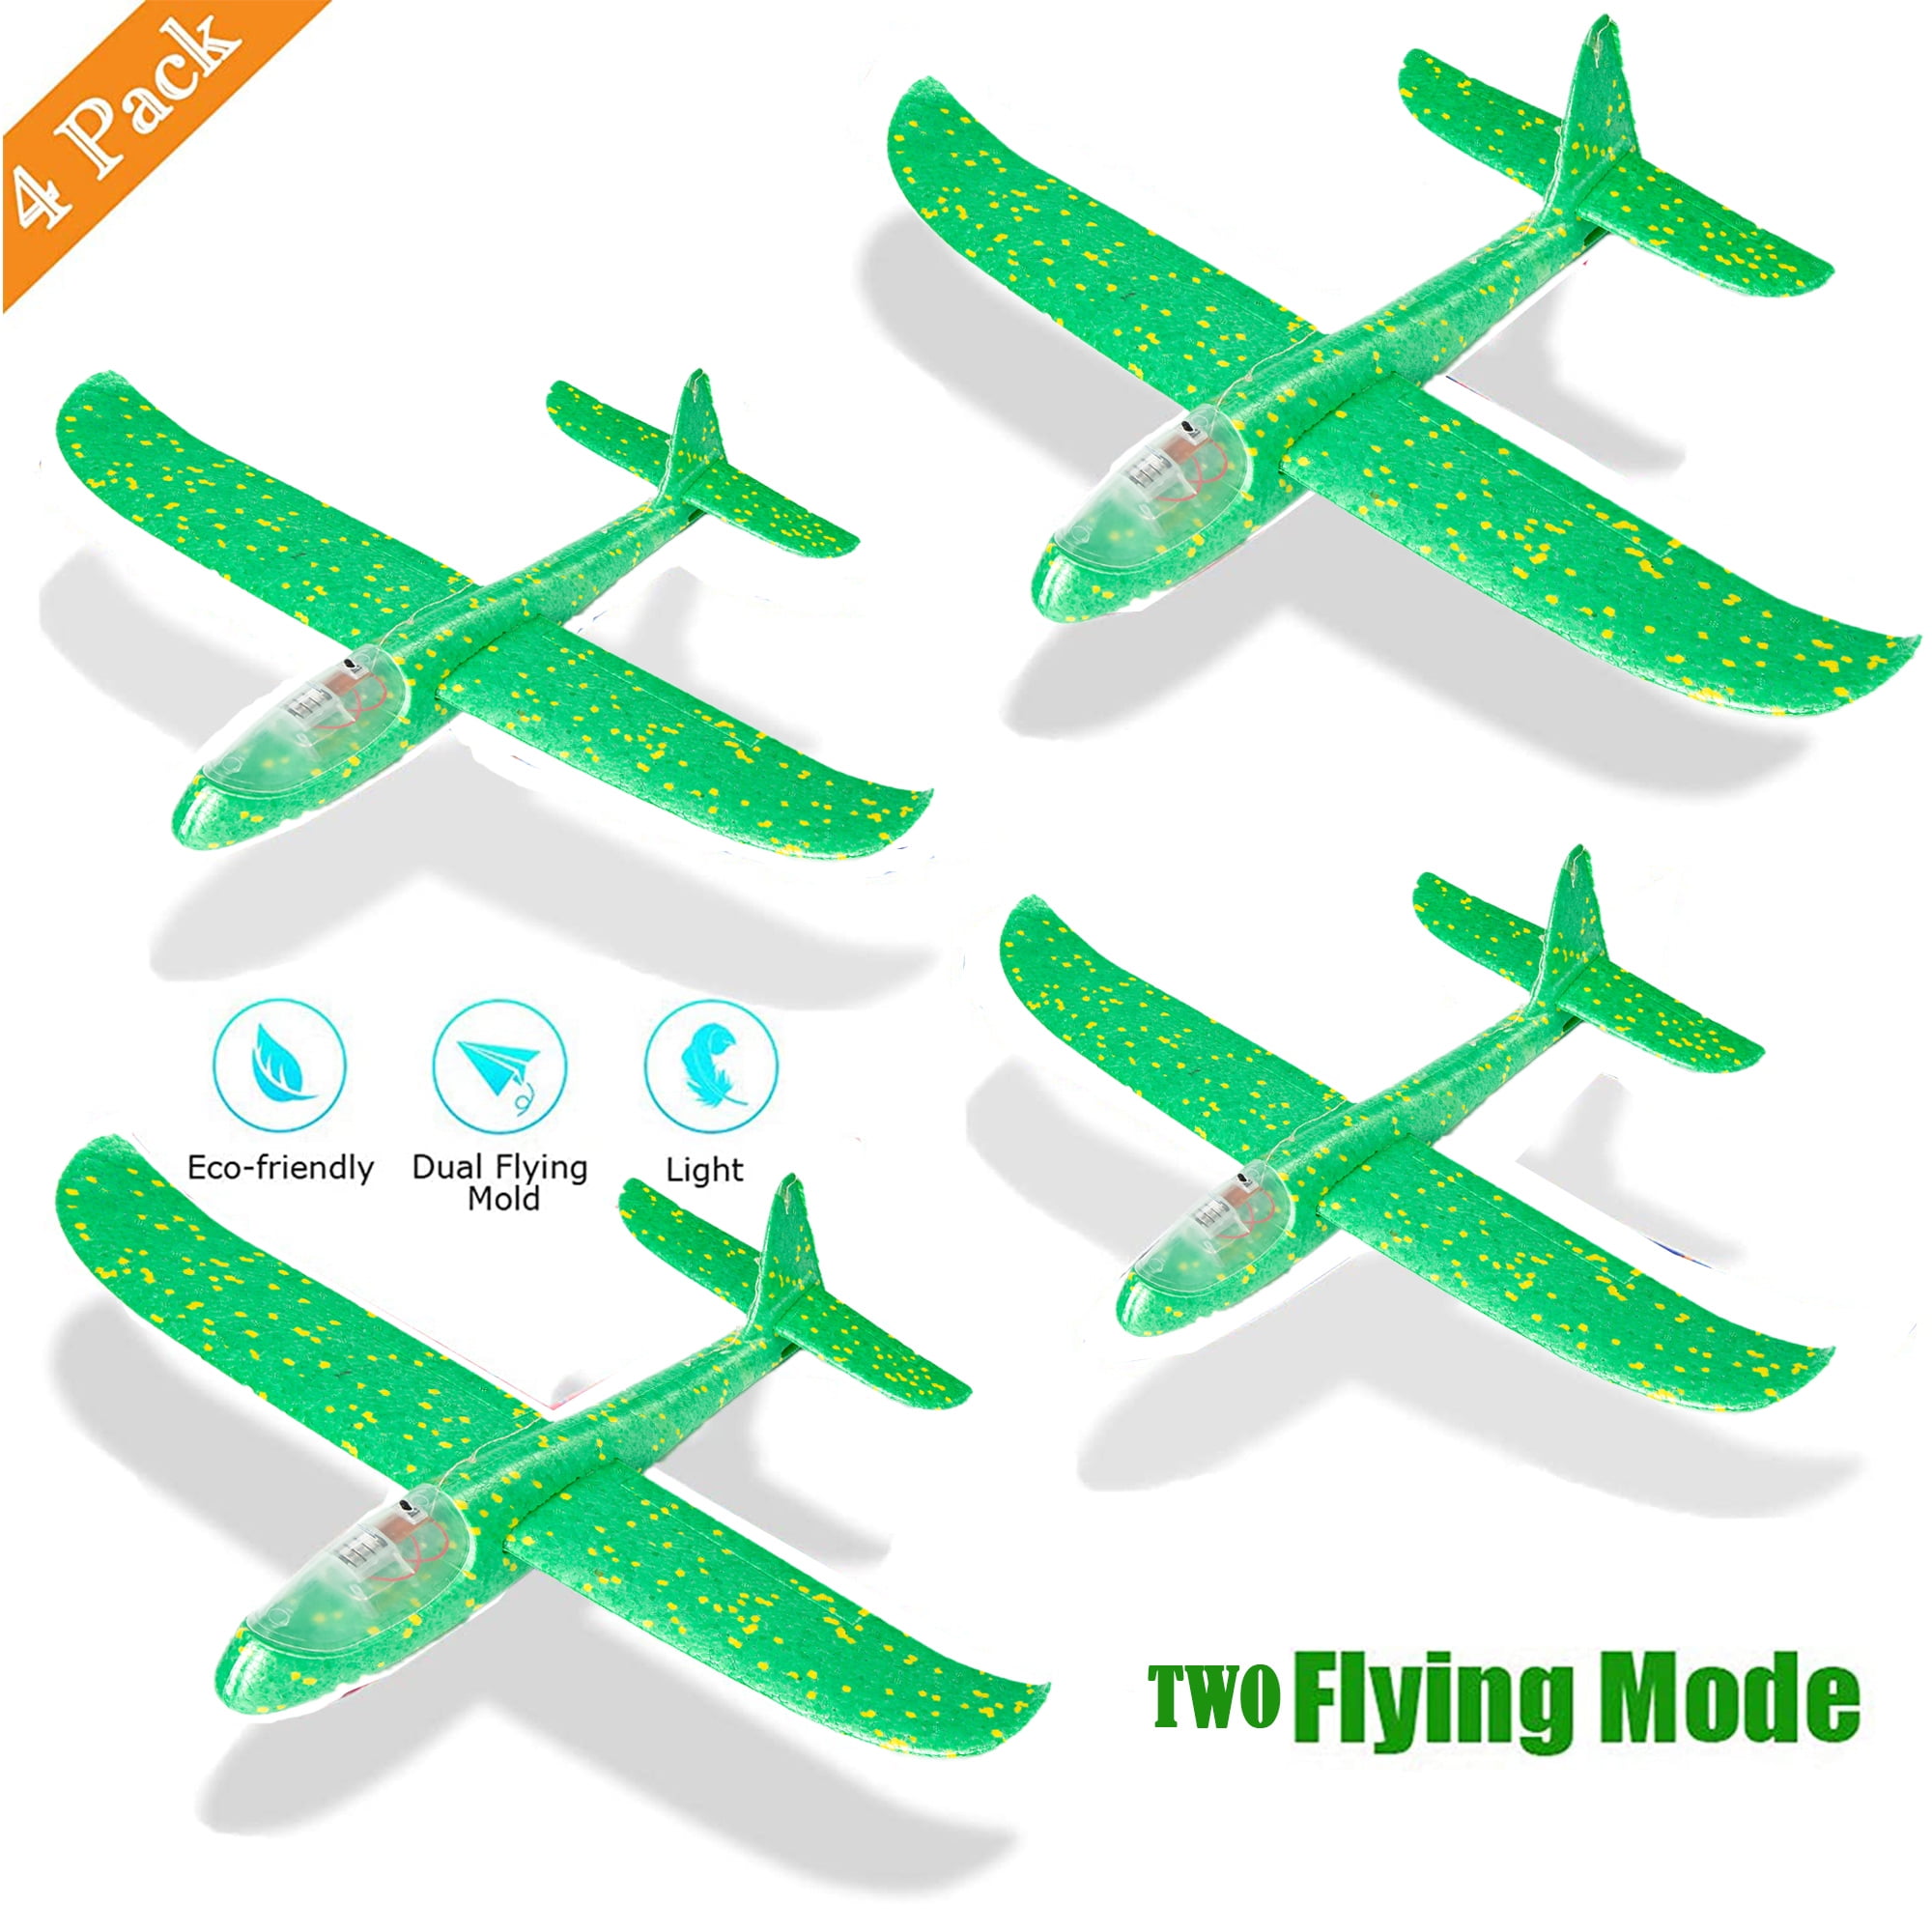 Details about   2x Flying Airplane Plane Toys Model Throwing Foam Plane Aircraft Green 